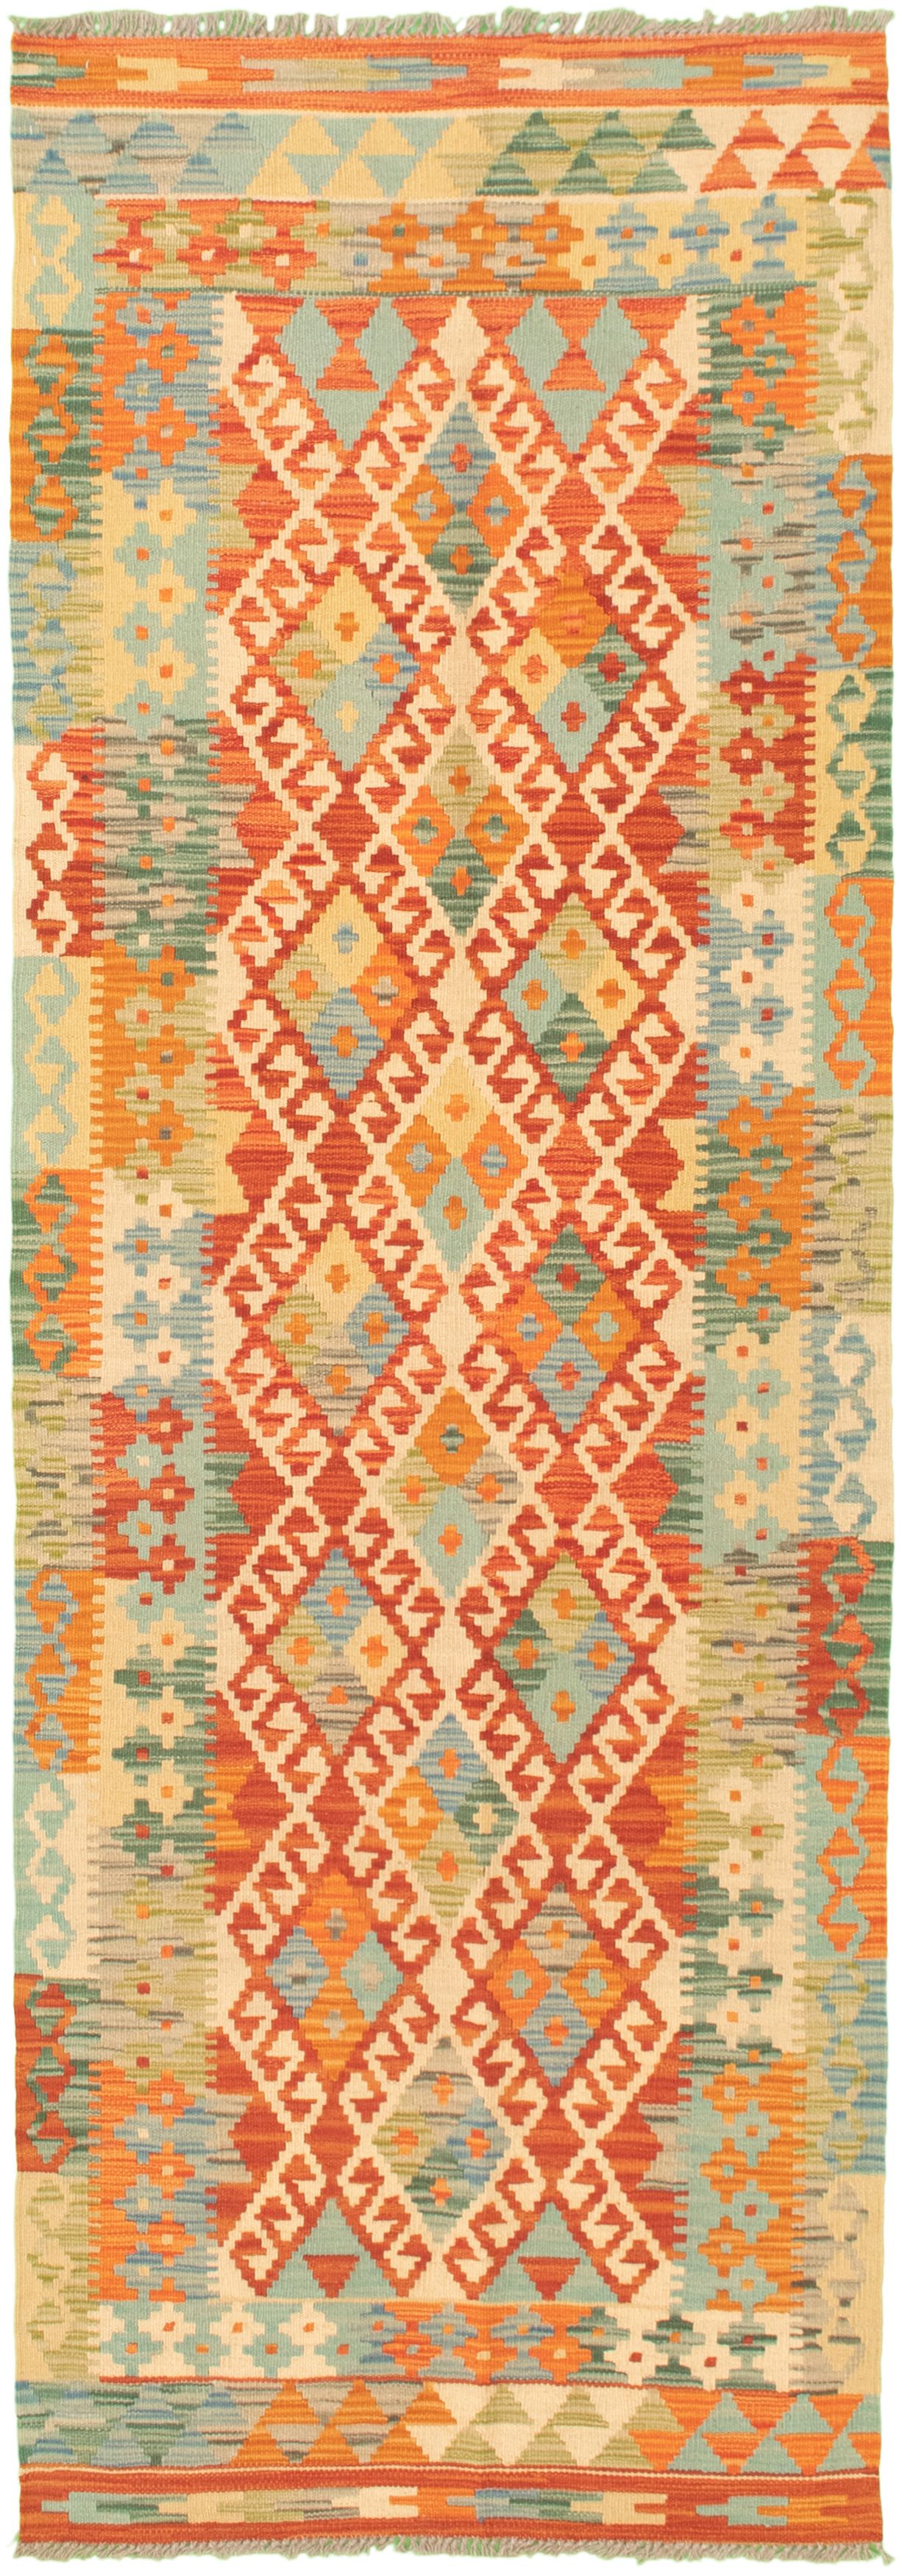 Hand woven Bold and Colorful  Dark Copper Wool Kilim 2'9" x 8'4"  Size: 2'9" x 8'4"  